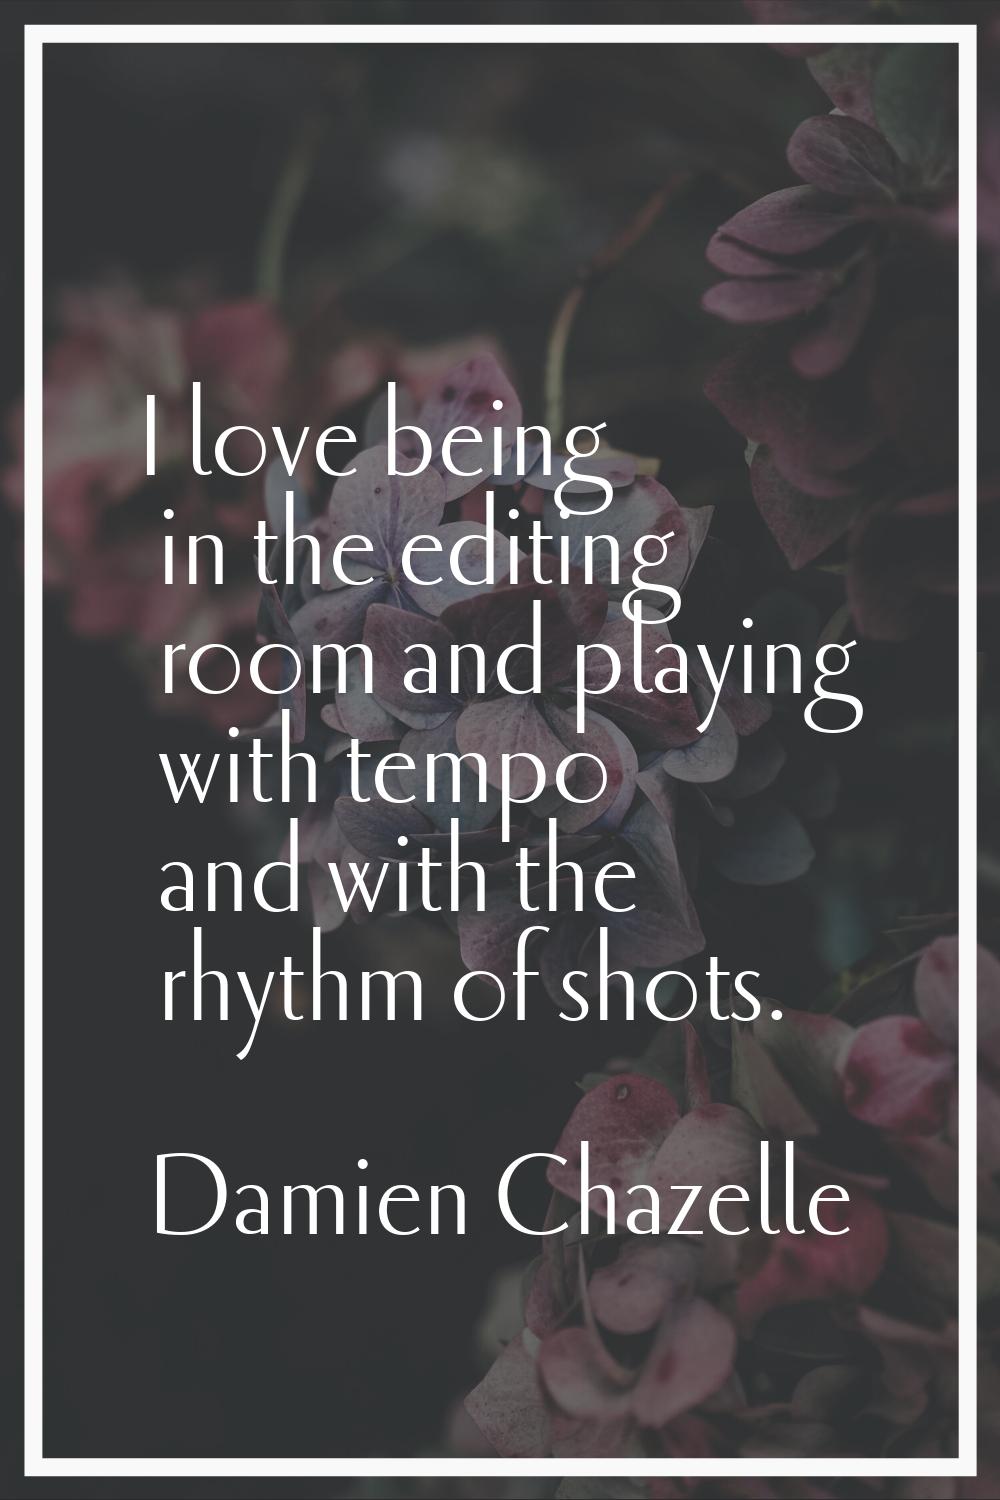 I love being in the editing room and playing with tempo and with the rhythm of shots.